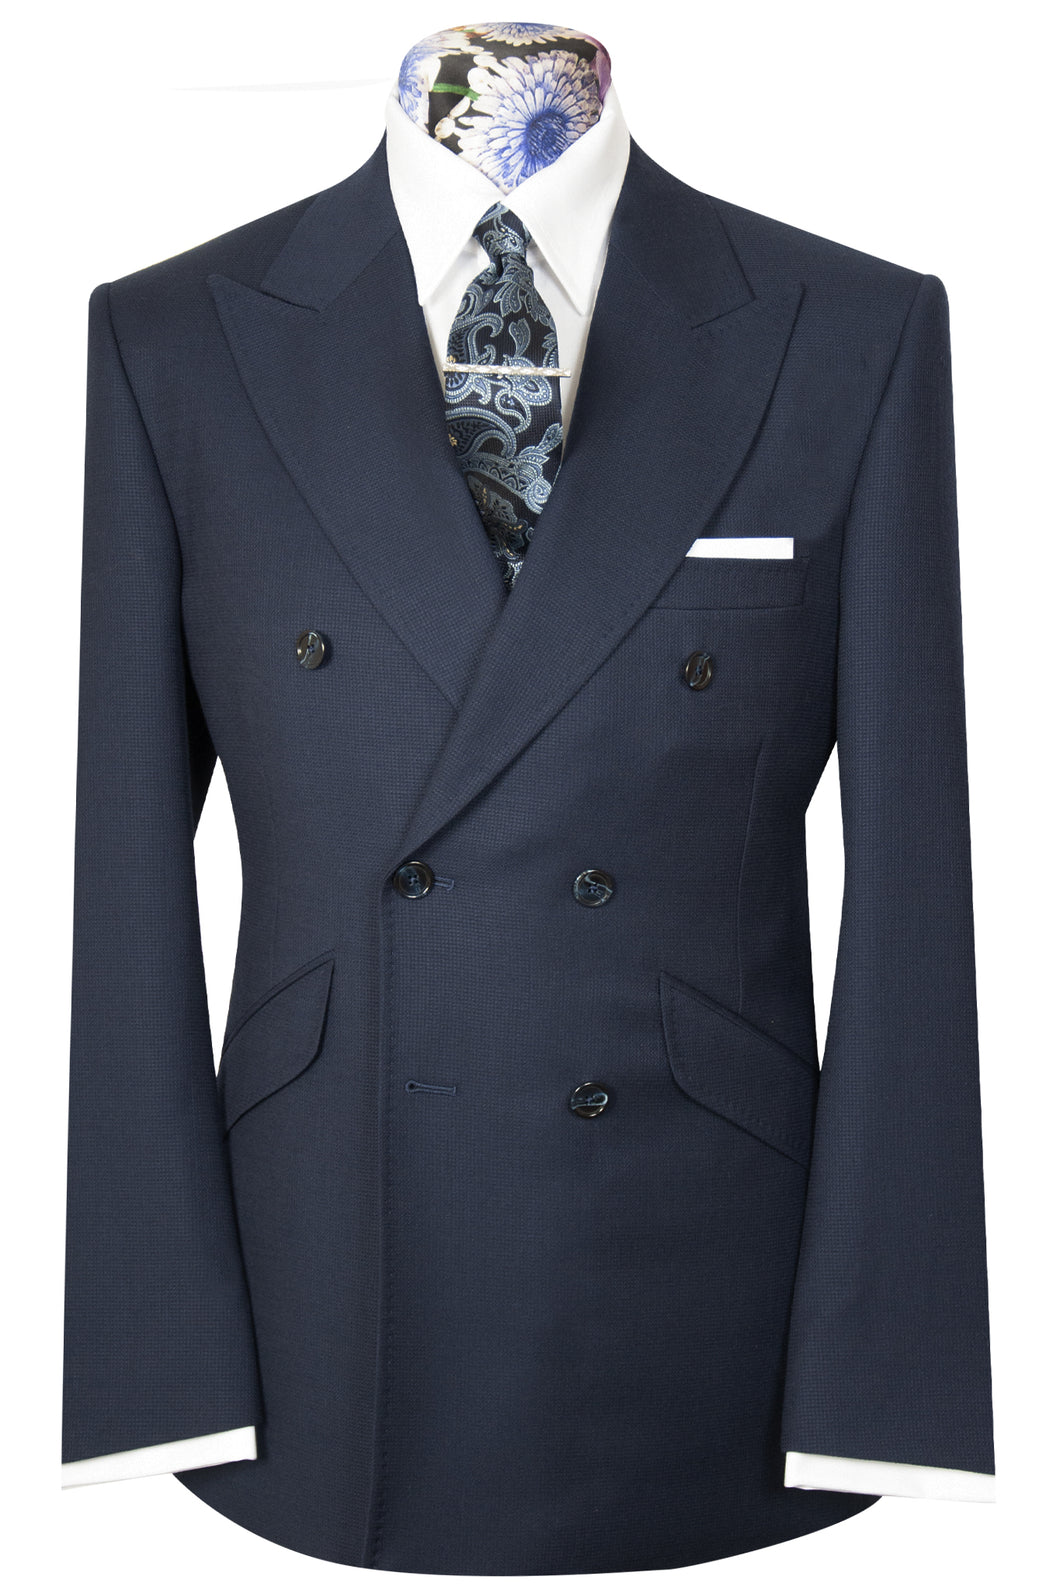 The Finchley Oxford Blue Weave Double Breasted Suit Jacket